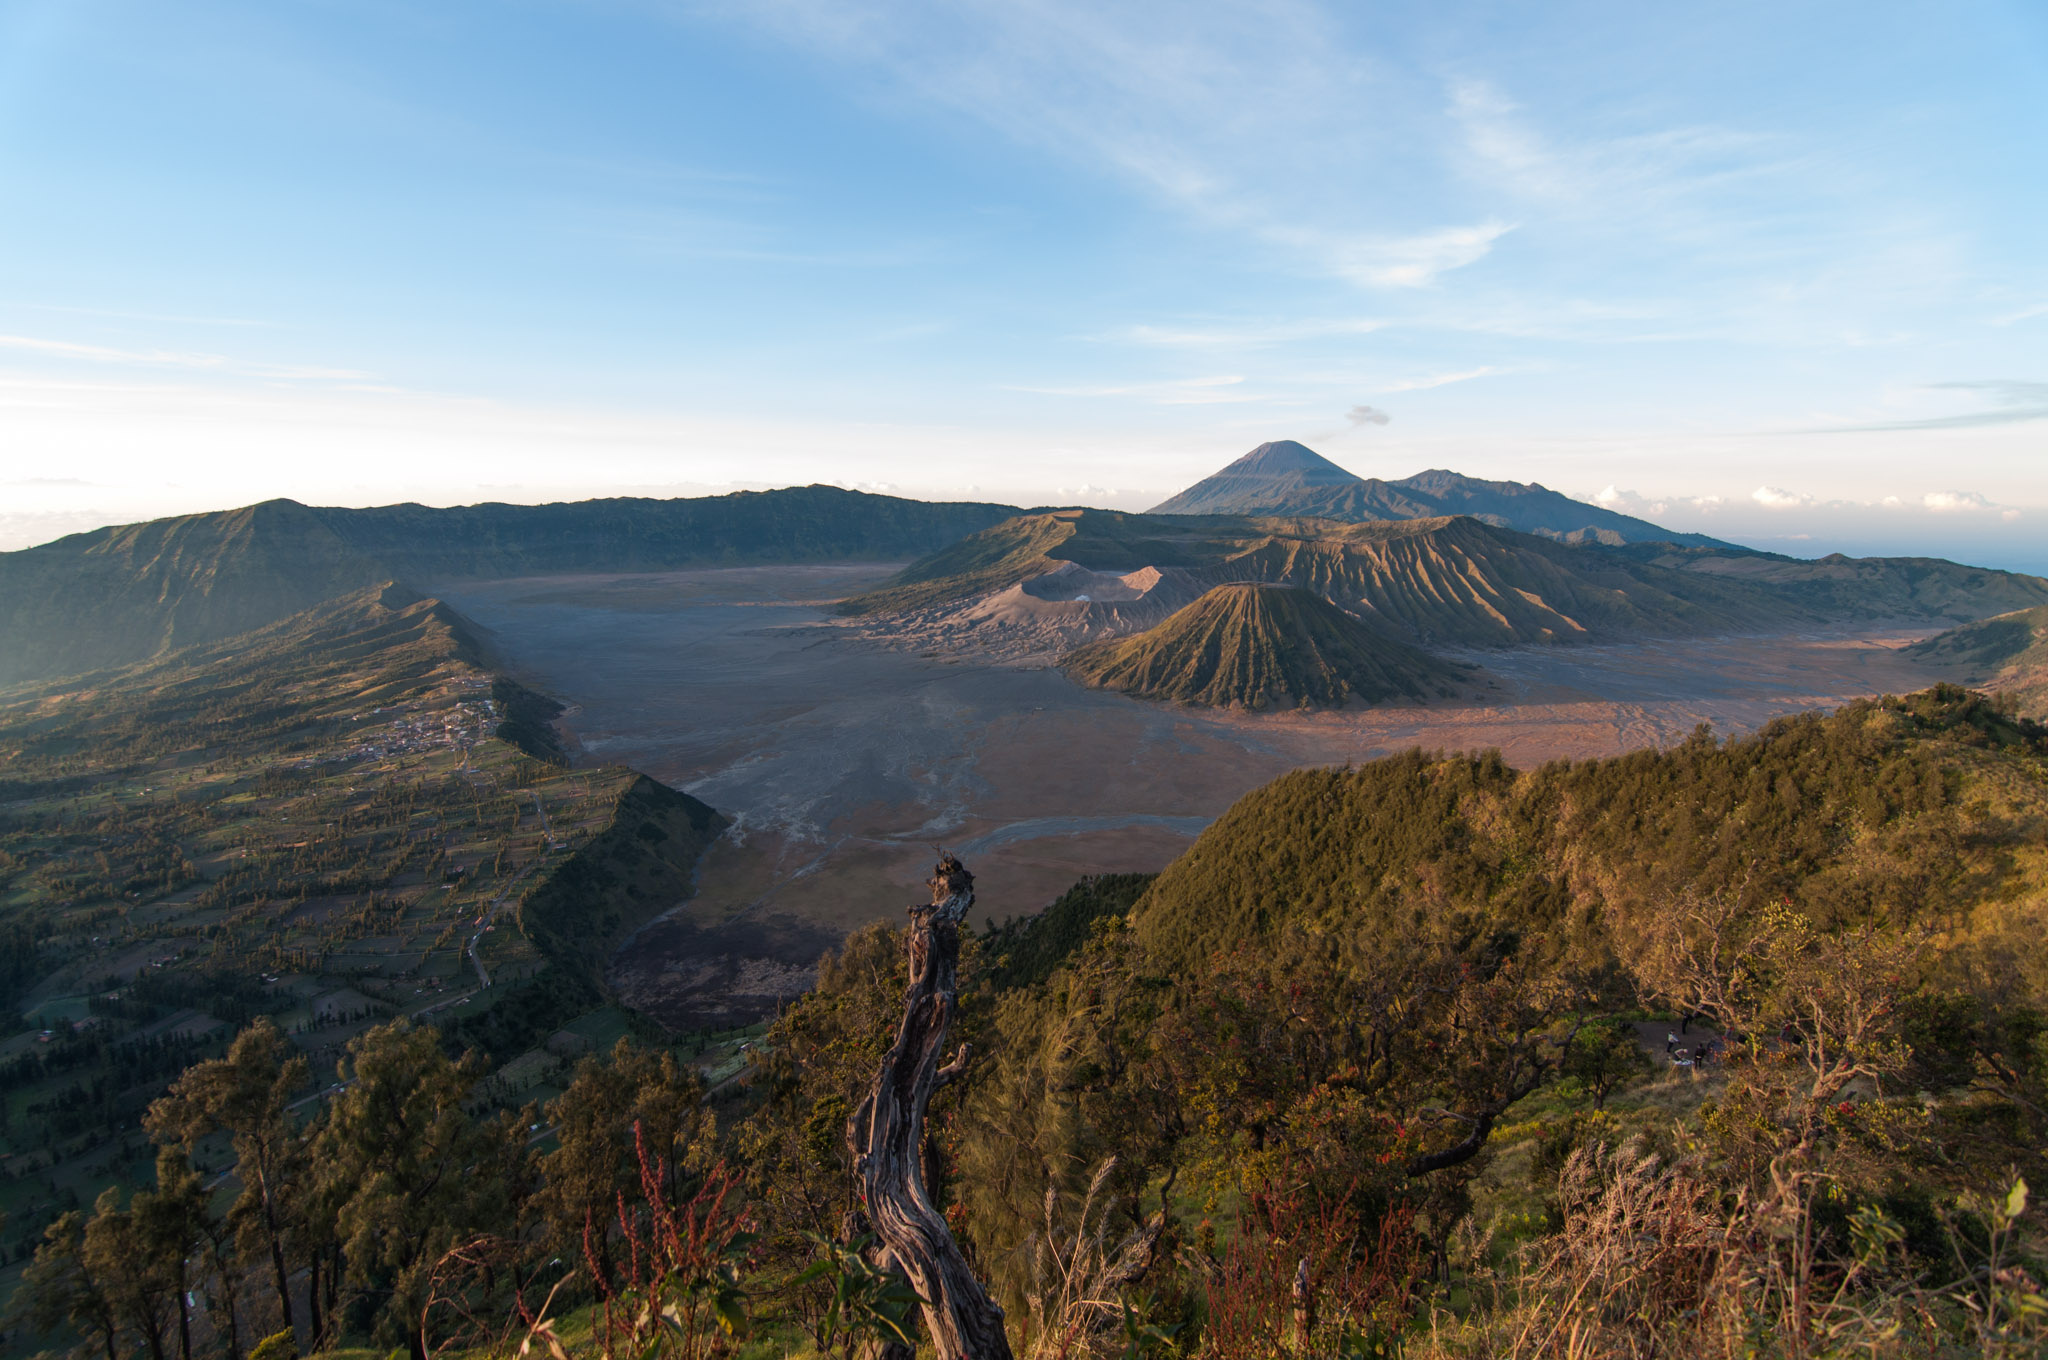 Mountain Bromo is Magnificent Wonder of Nature